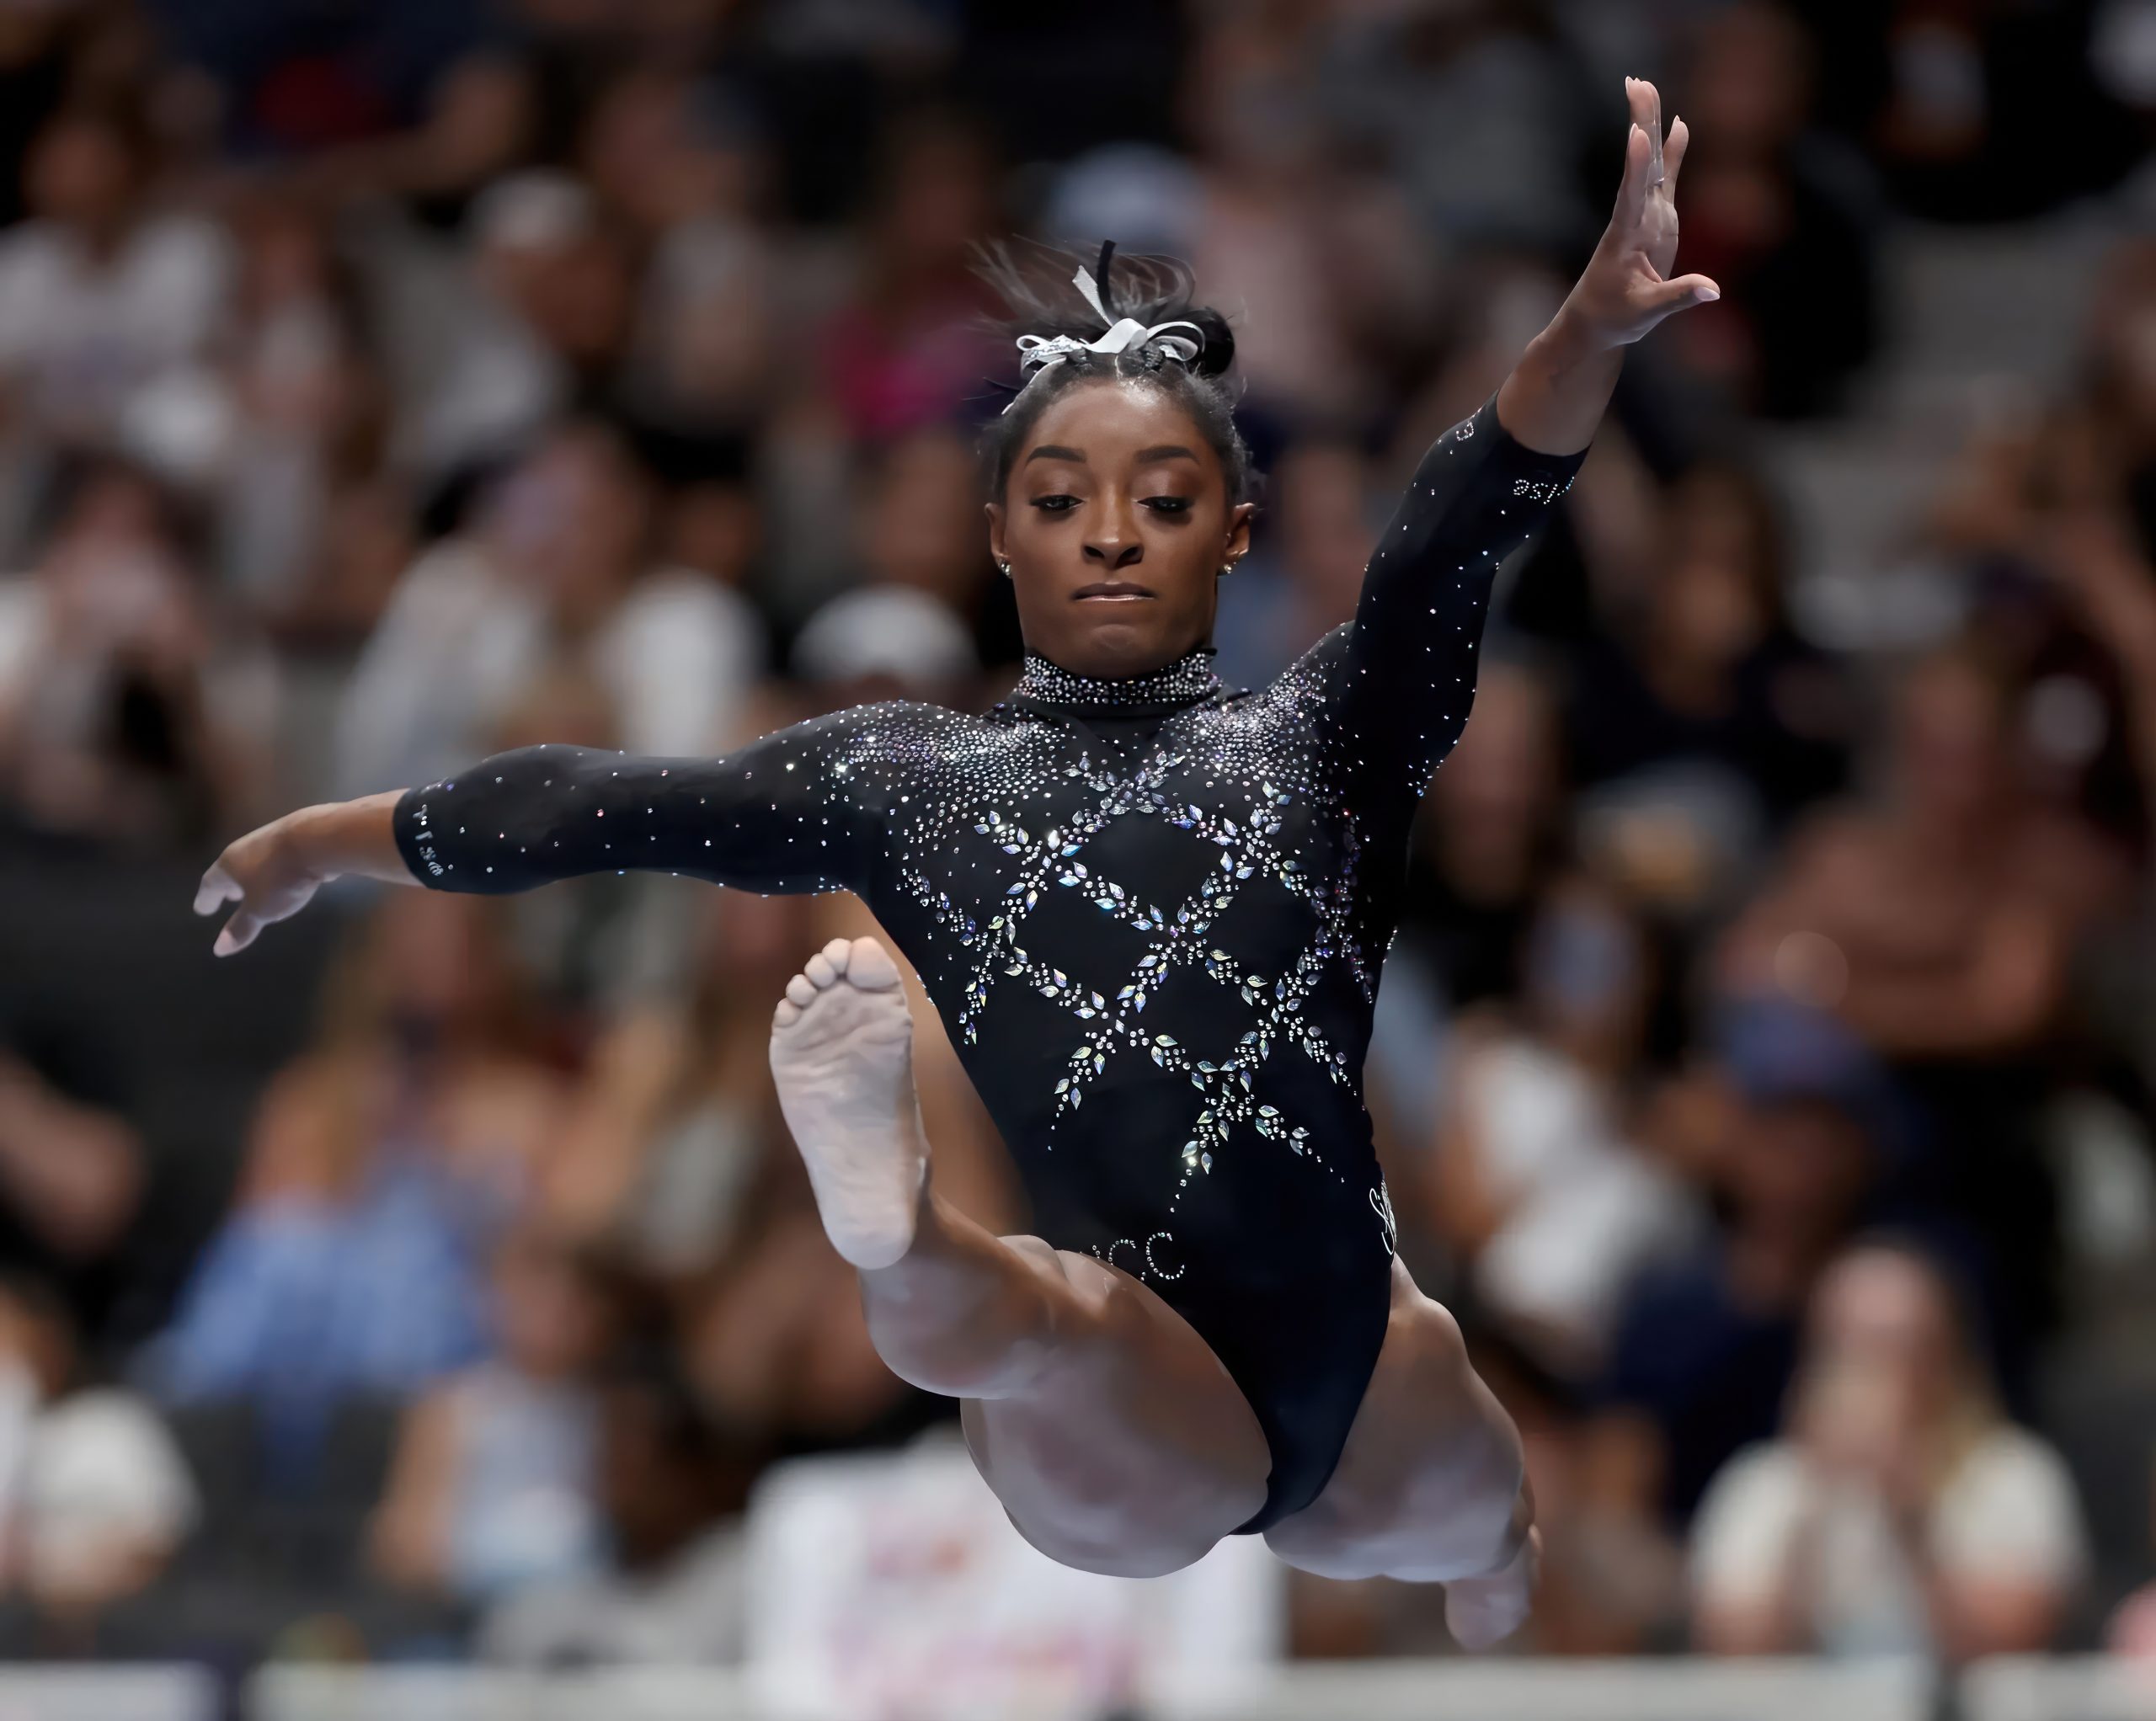 Simone Biles ends the first day of competition at the US Gymnastics  Championships with the lead